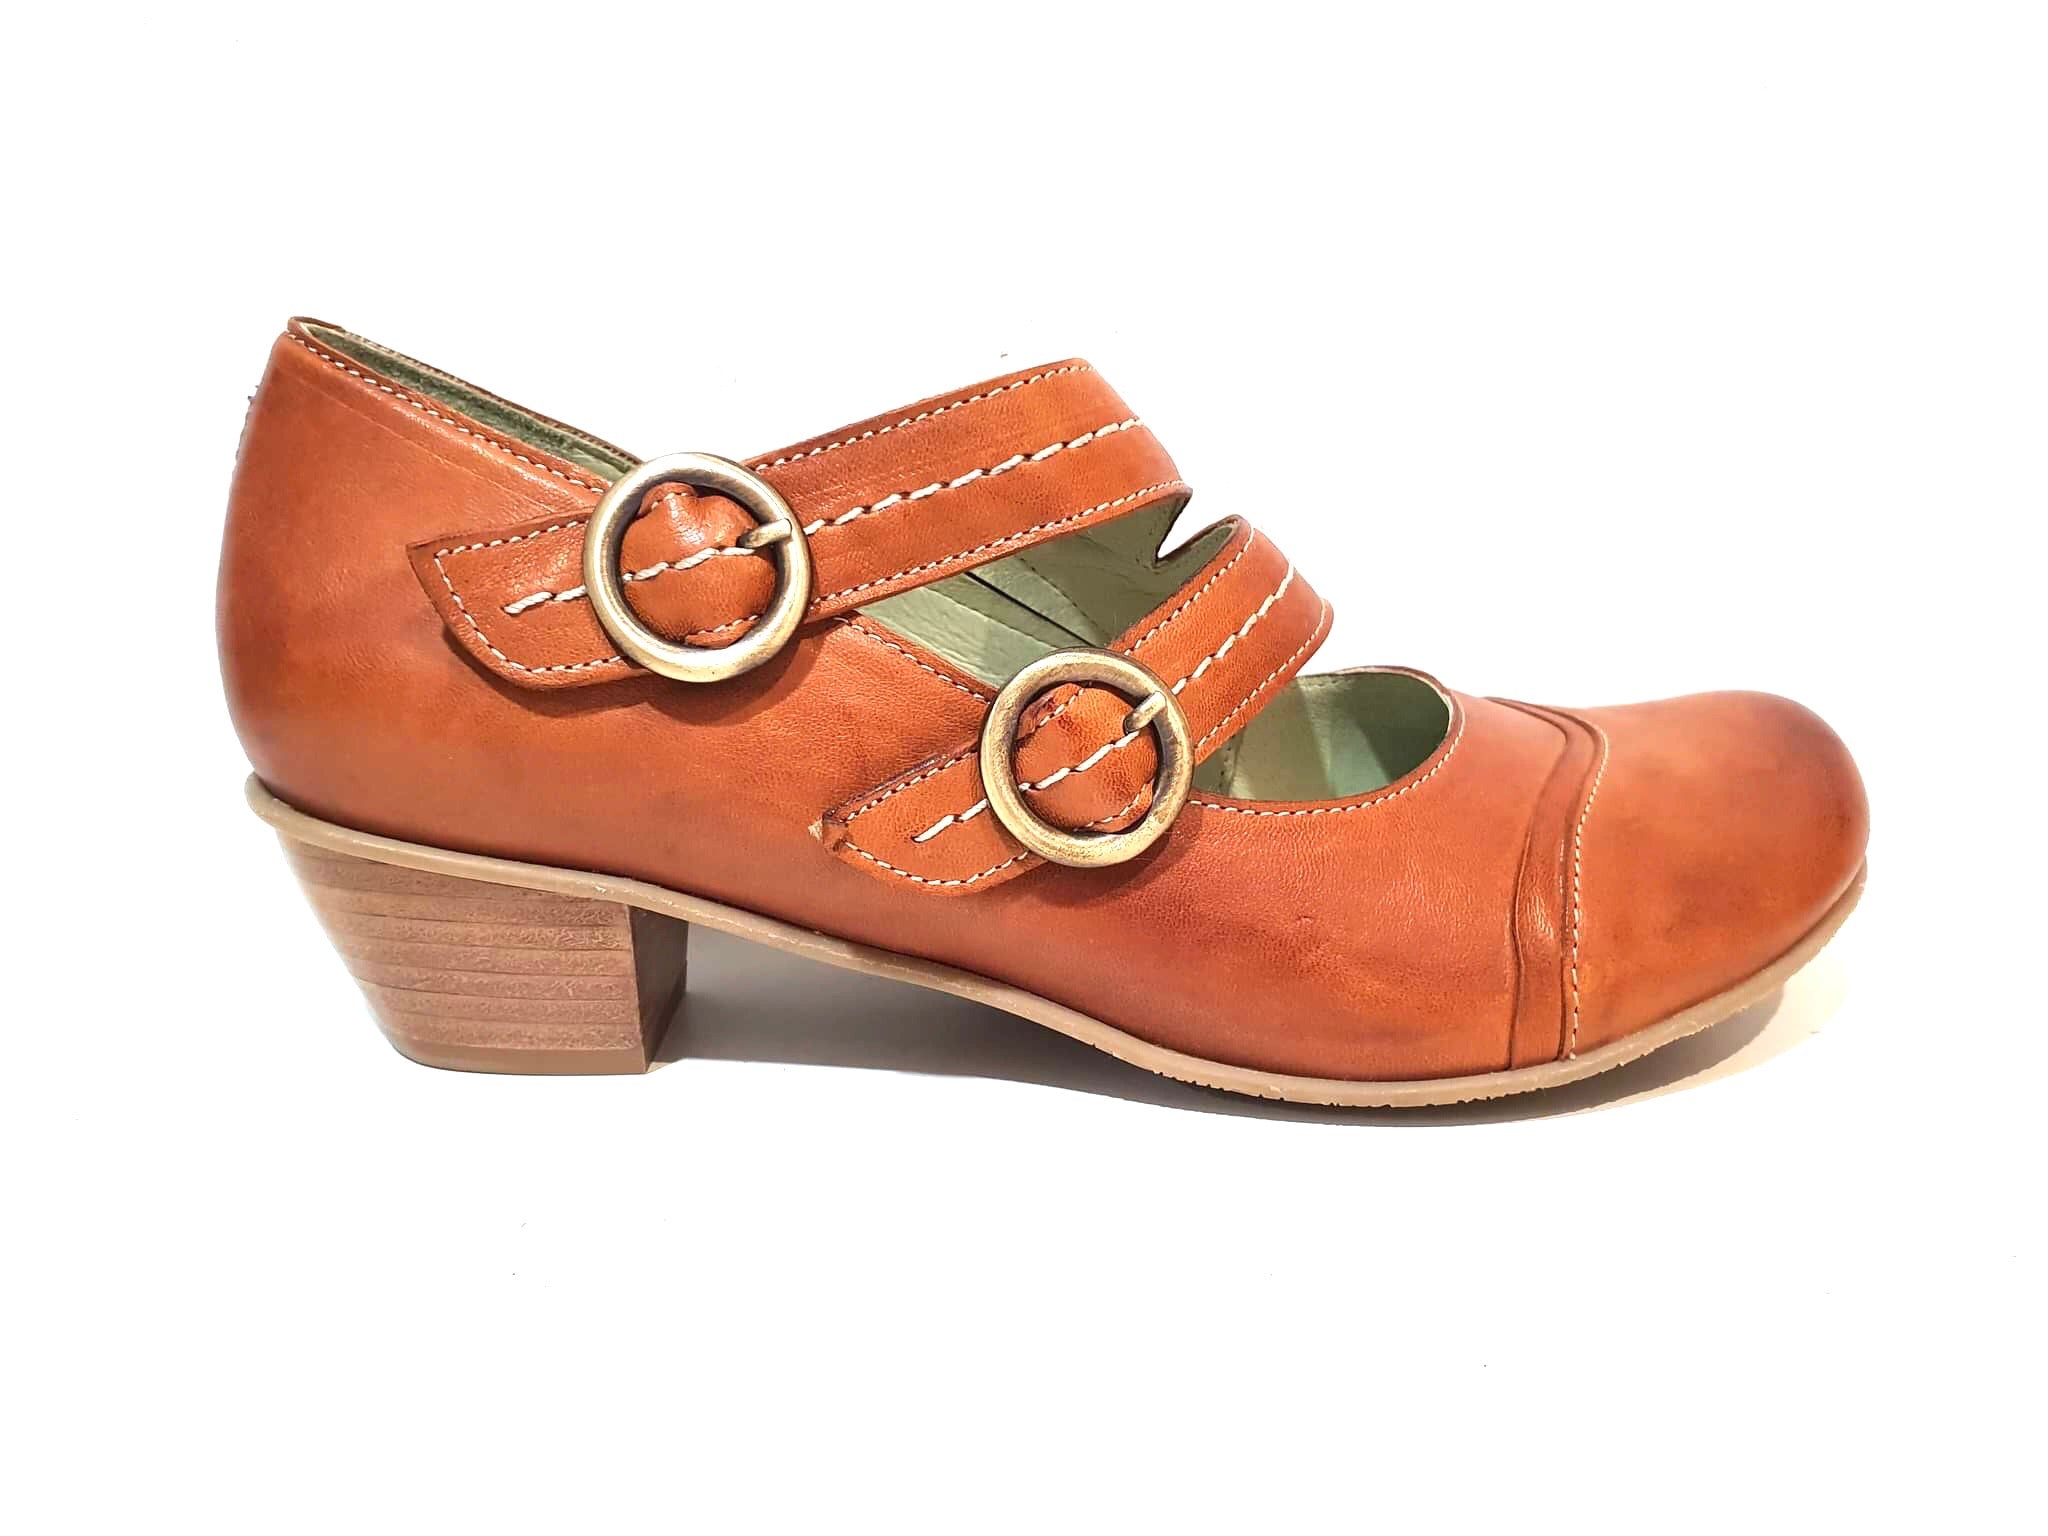 Mentha Alt Cognac Leather Women’s Court Shoes Mary Jane Double Buckle Velcro Made In Portugal